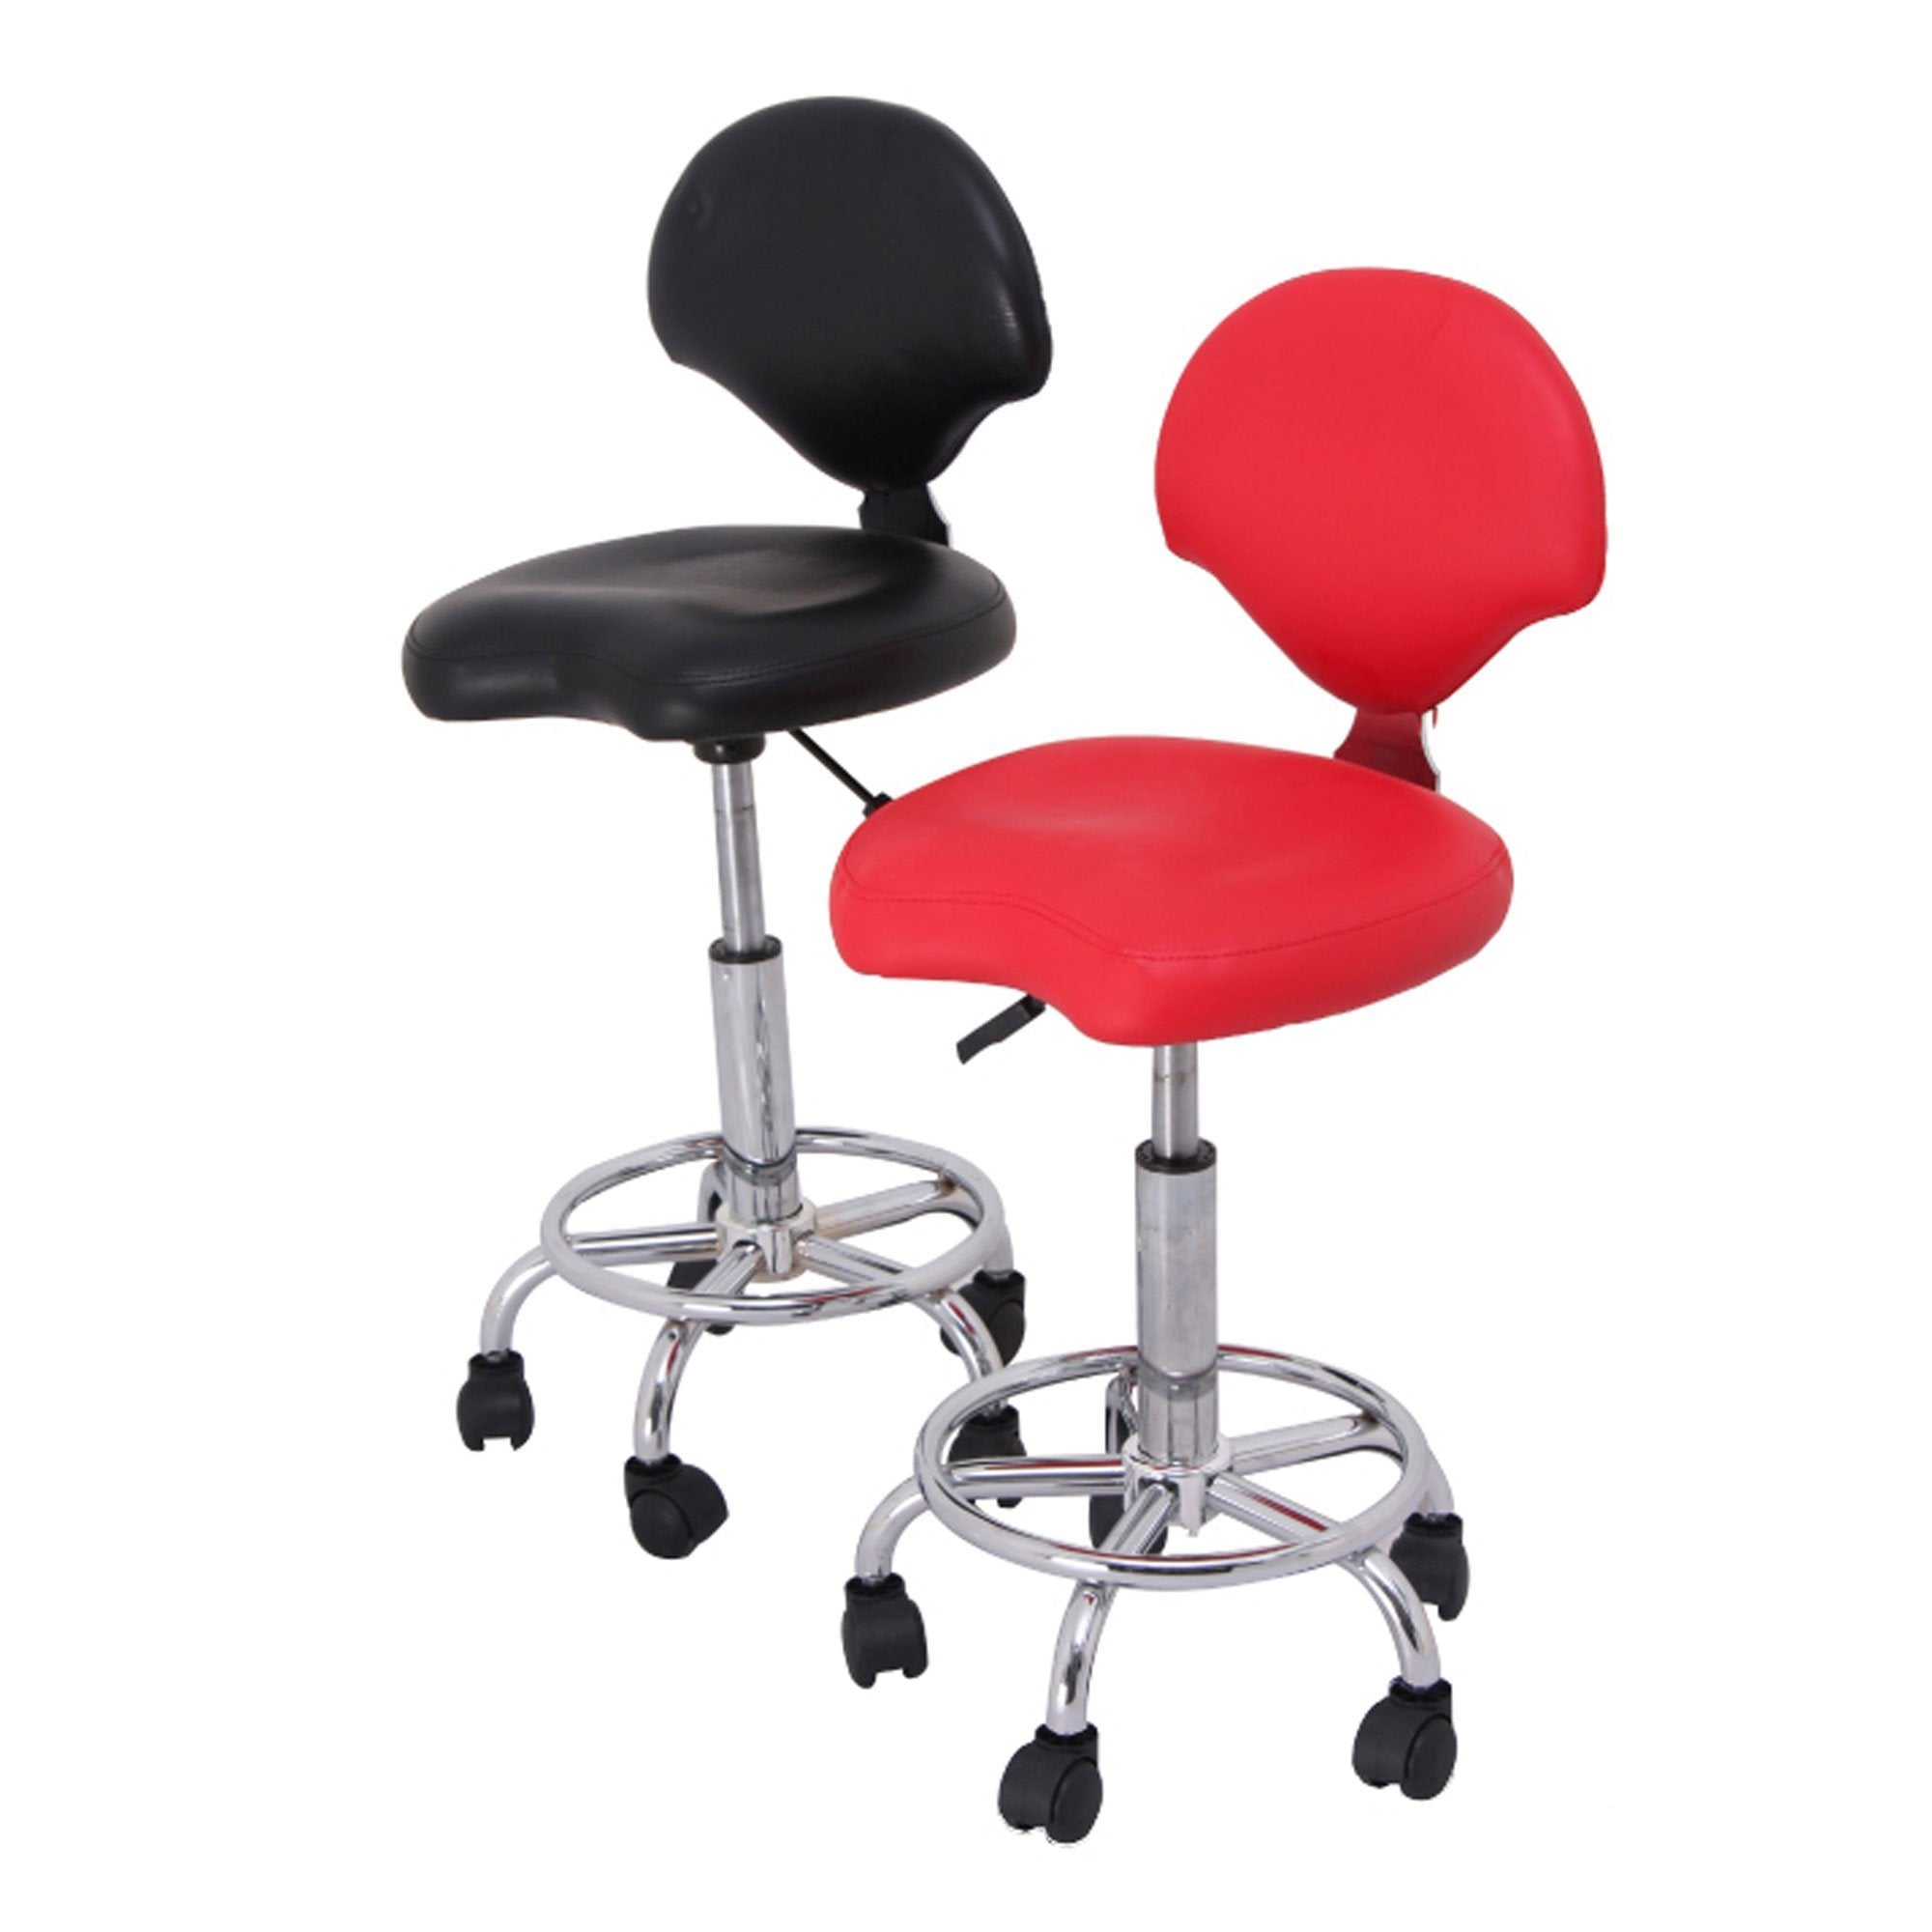 Aelous Grooming Chair Red and Black Colours